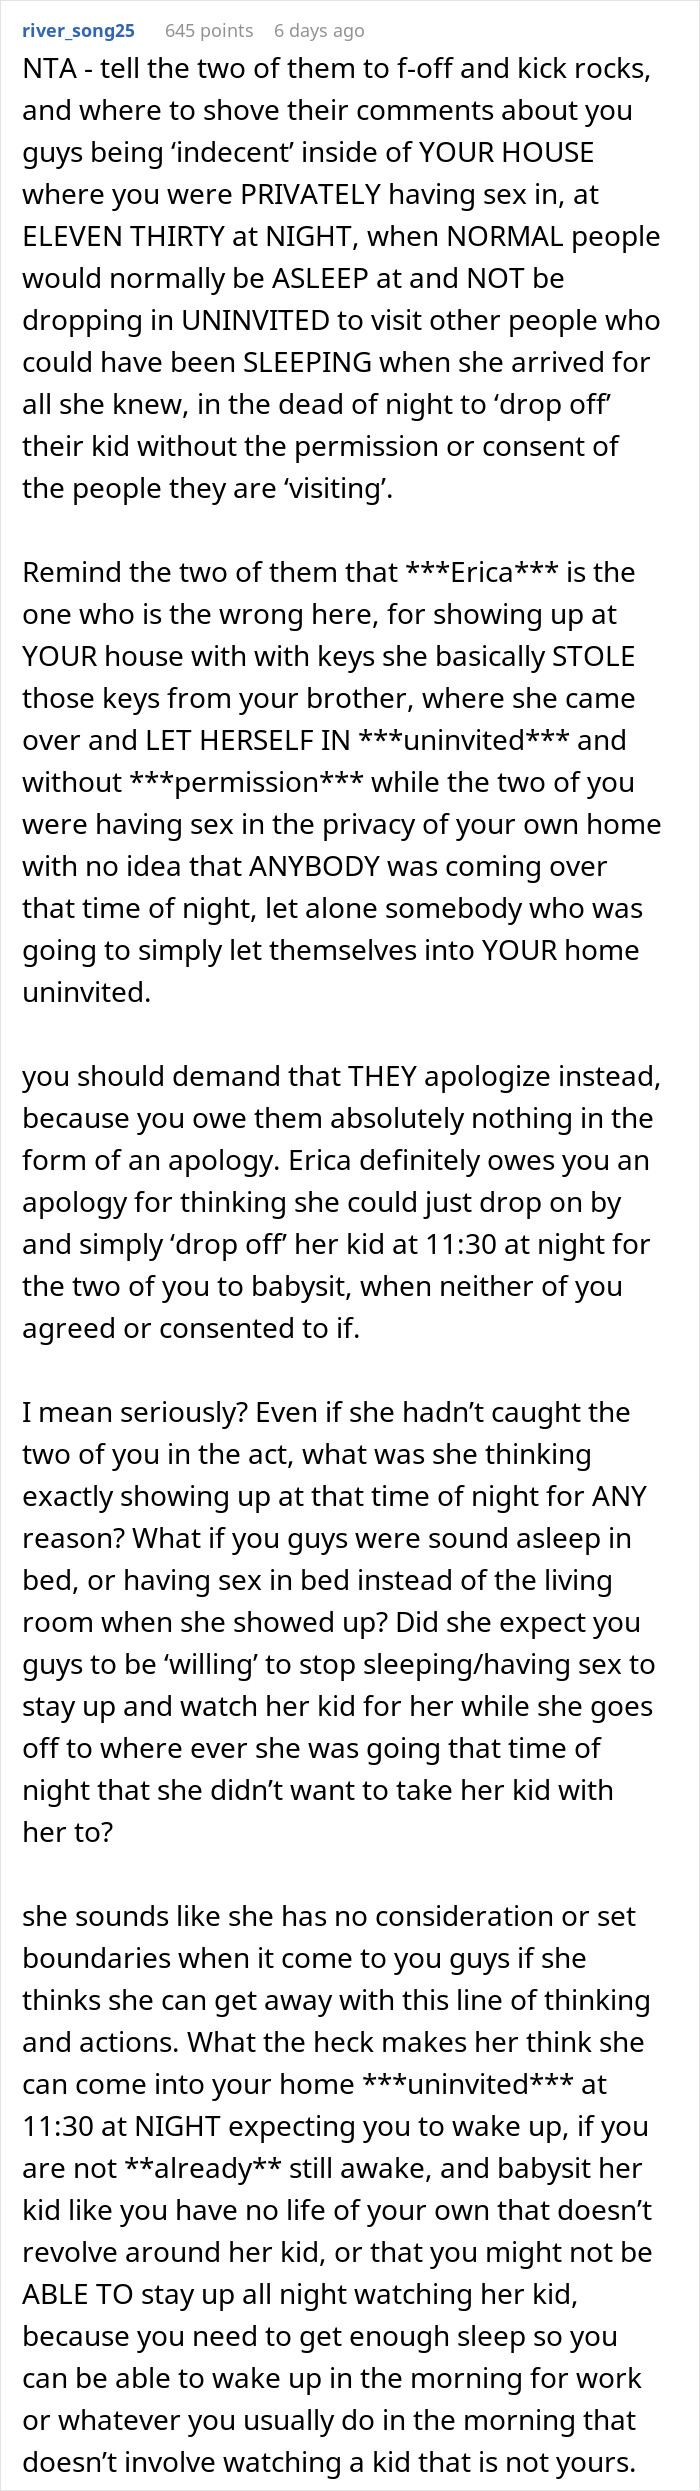 Woman Barges Into A Couple’s House Uninvited With A Child, Shames Them ...